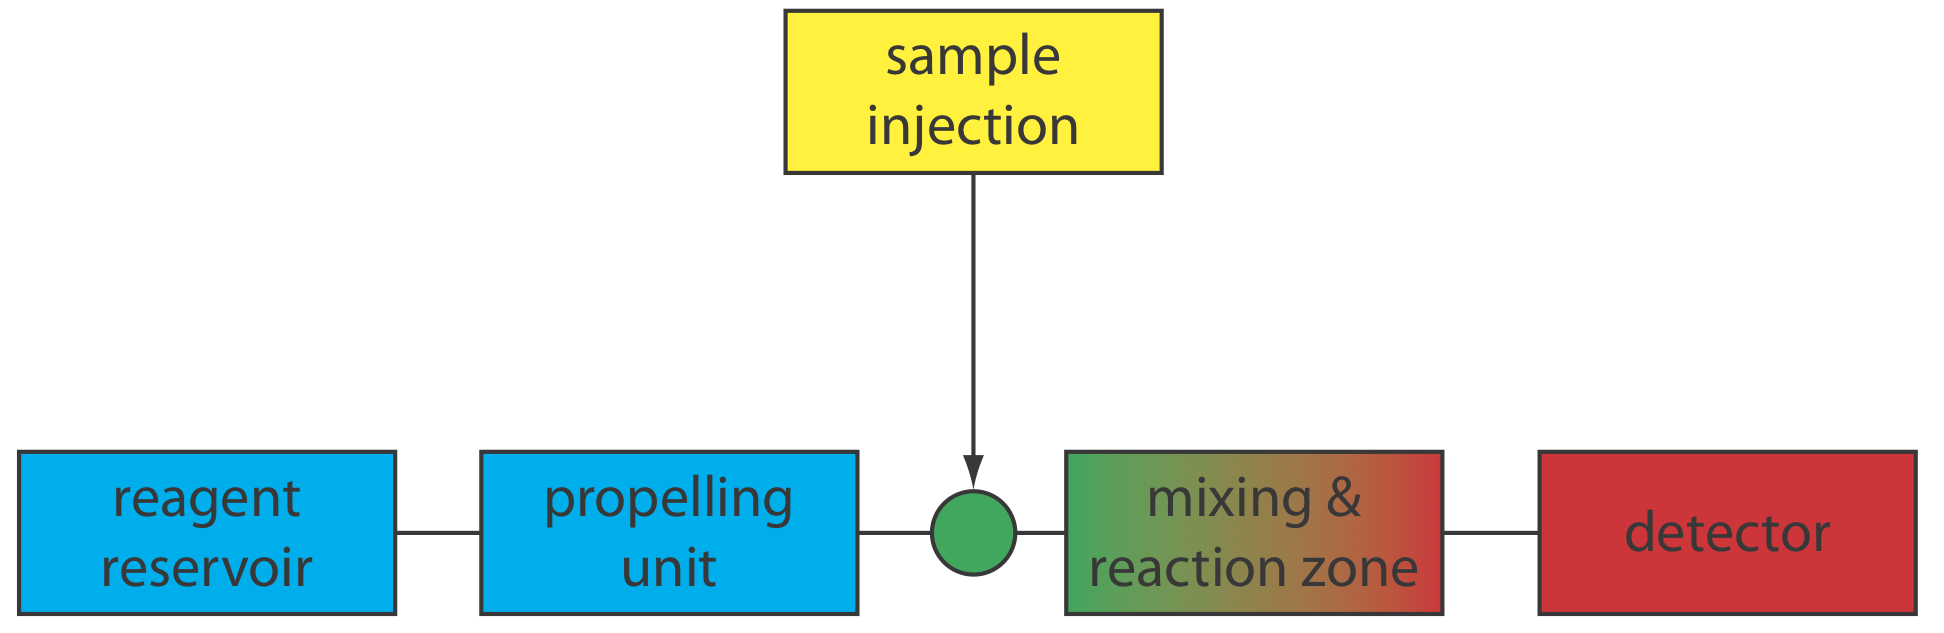 Reagent leaves the reservoir through a propelling unit where it comes into contact with the sample through injection. Following injection, there is a mixing and reacting zone and finally, detection.